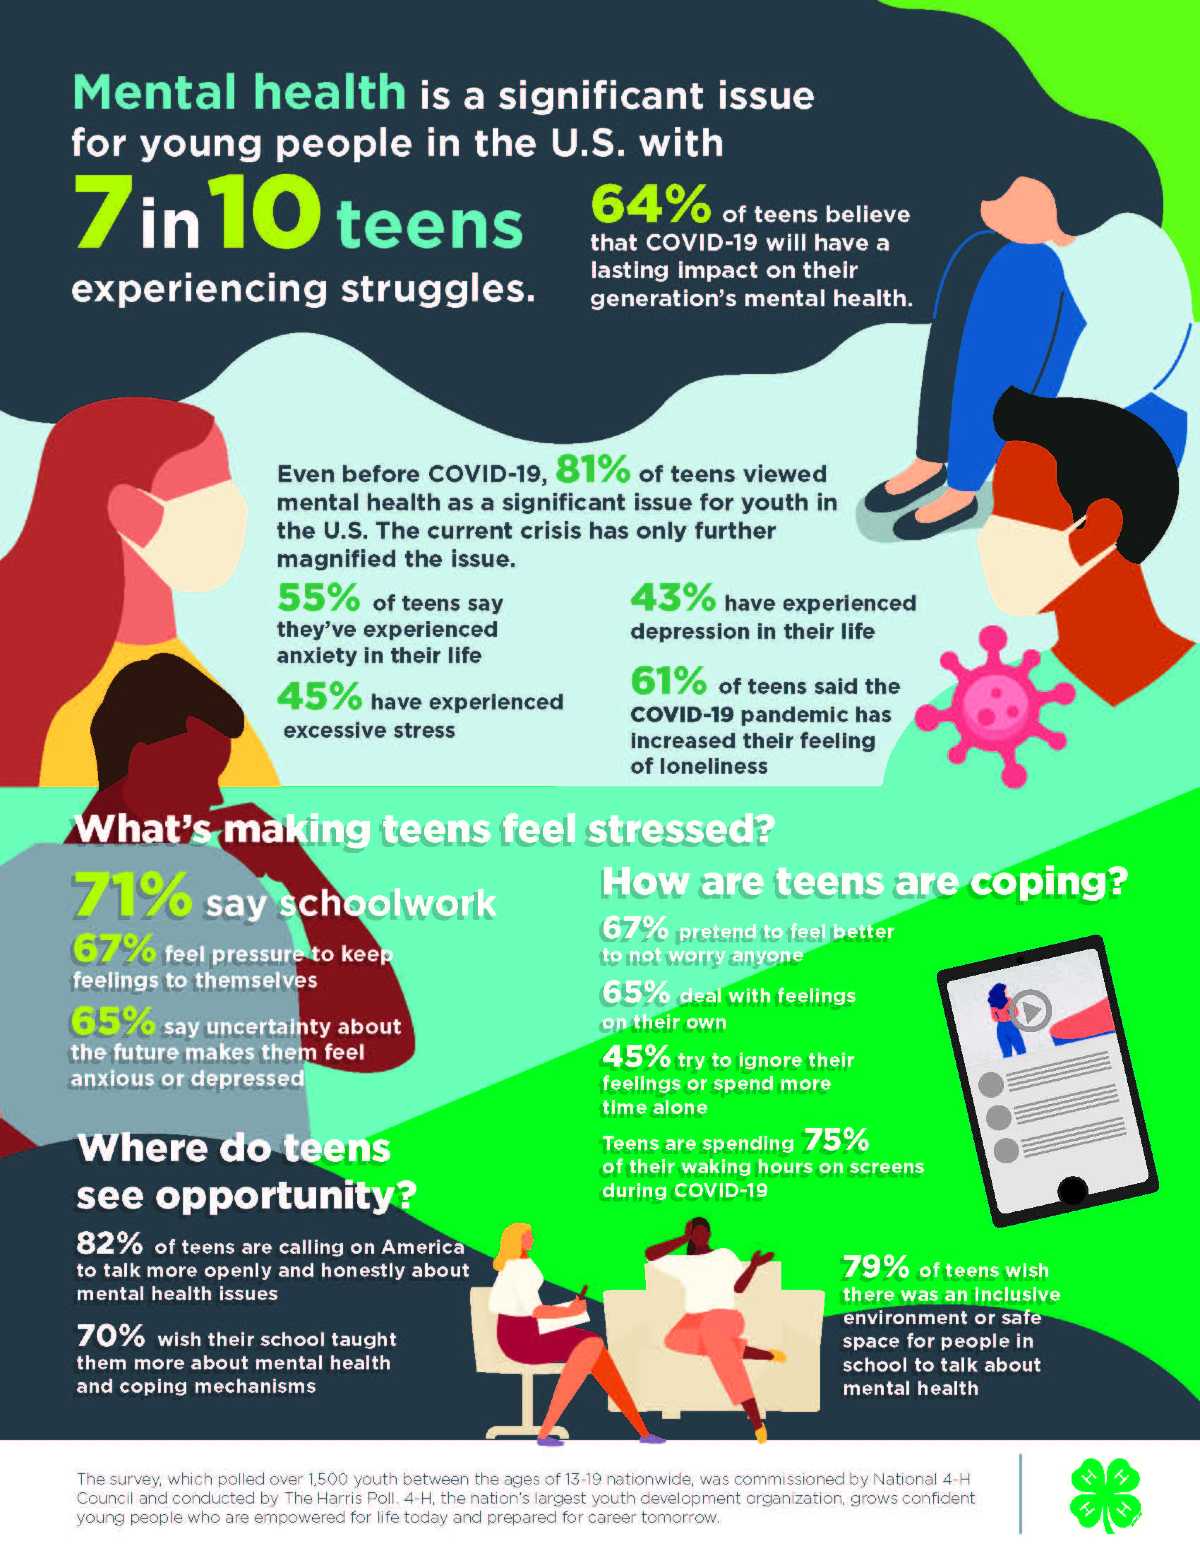 (Refer to PDF for complete infographic.) Mental health is a significant issue for young people in the U.S. with 7 in 10 teens experiencing struggles.